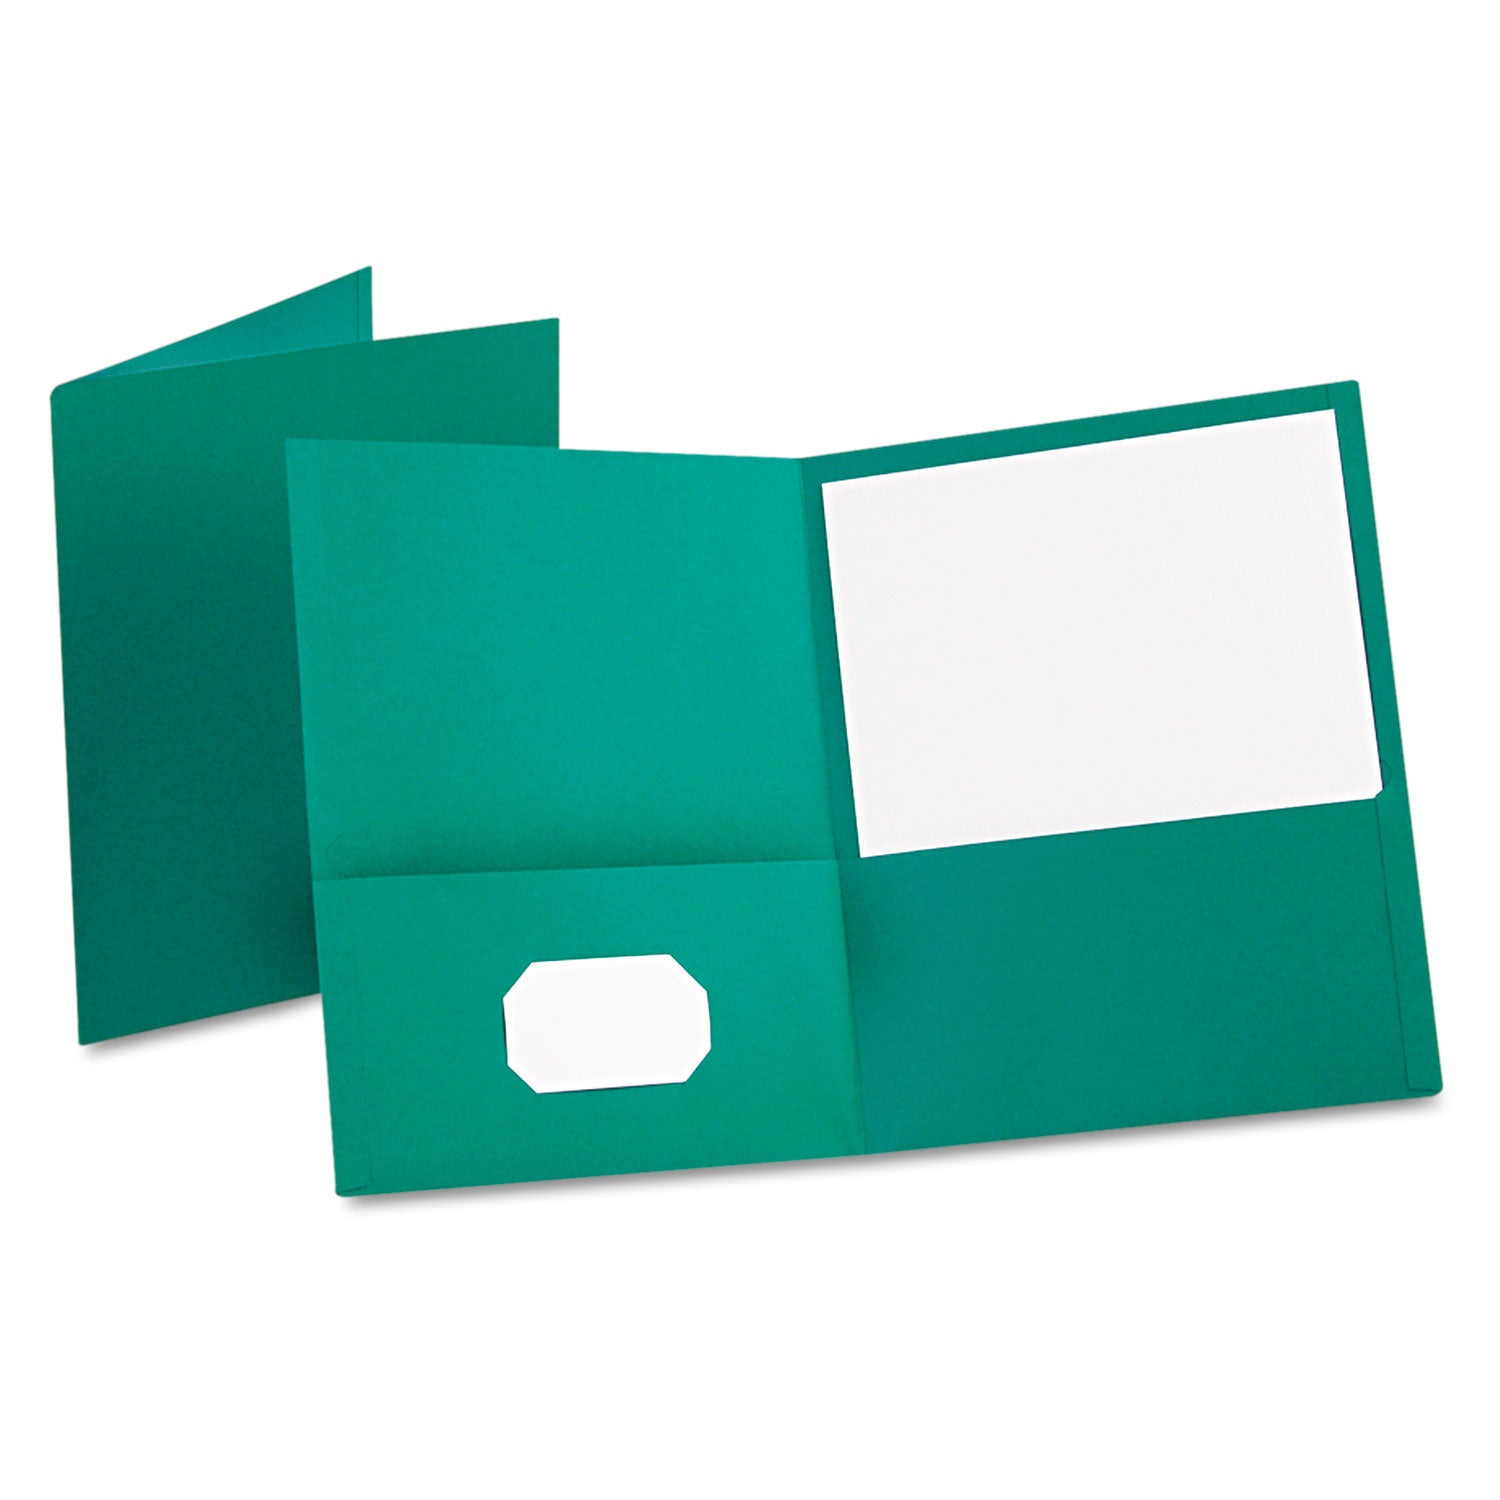 Twin-Pocket Folder, Embossed Leather Grain Paper, 0.5" Capacity, 11 x 8.5, Teal, 25/Box - 